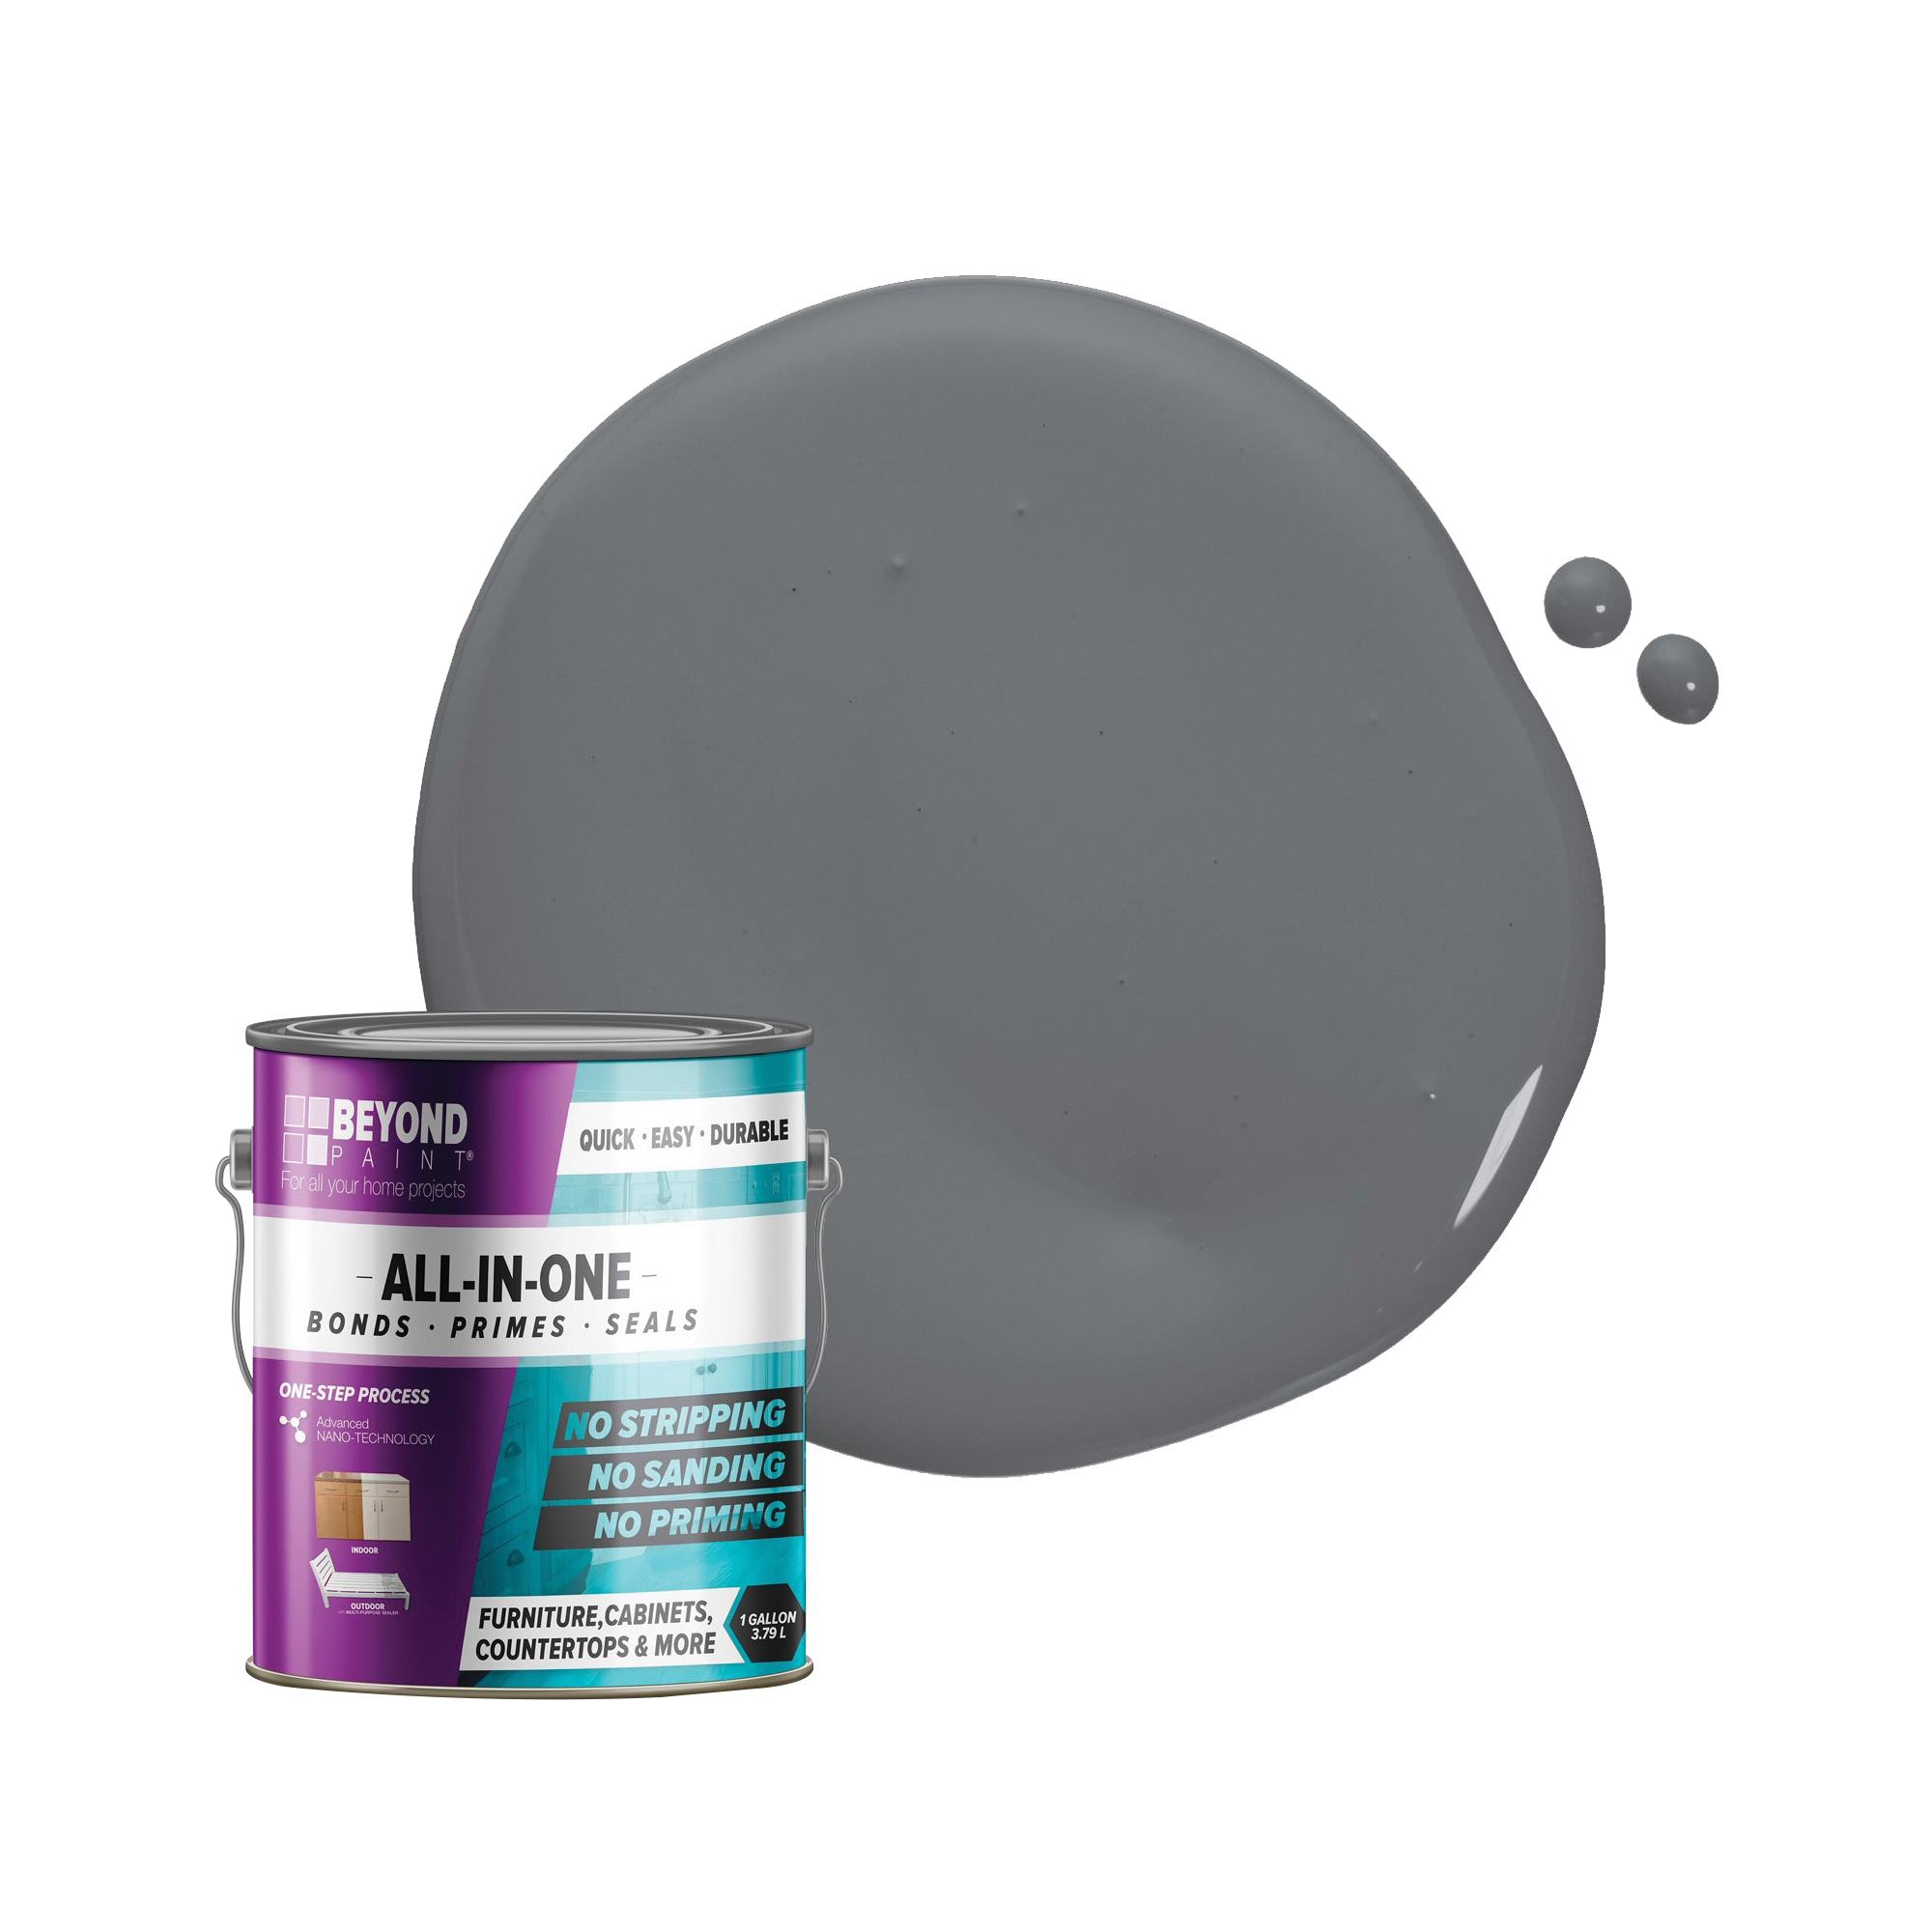 BEYOND PAINT All-In-One Series BP20 Craft Paint, Flat, Pewter, 1 gal